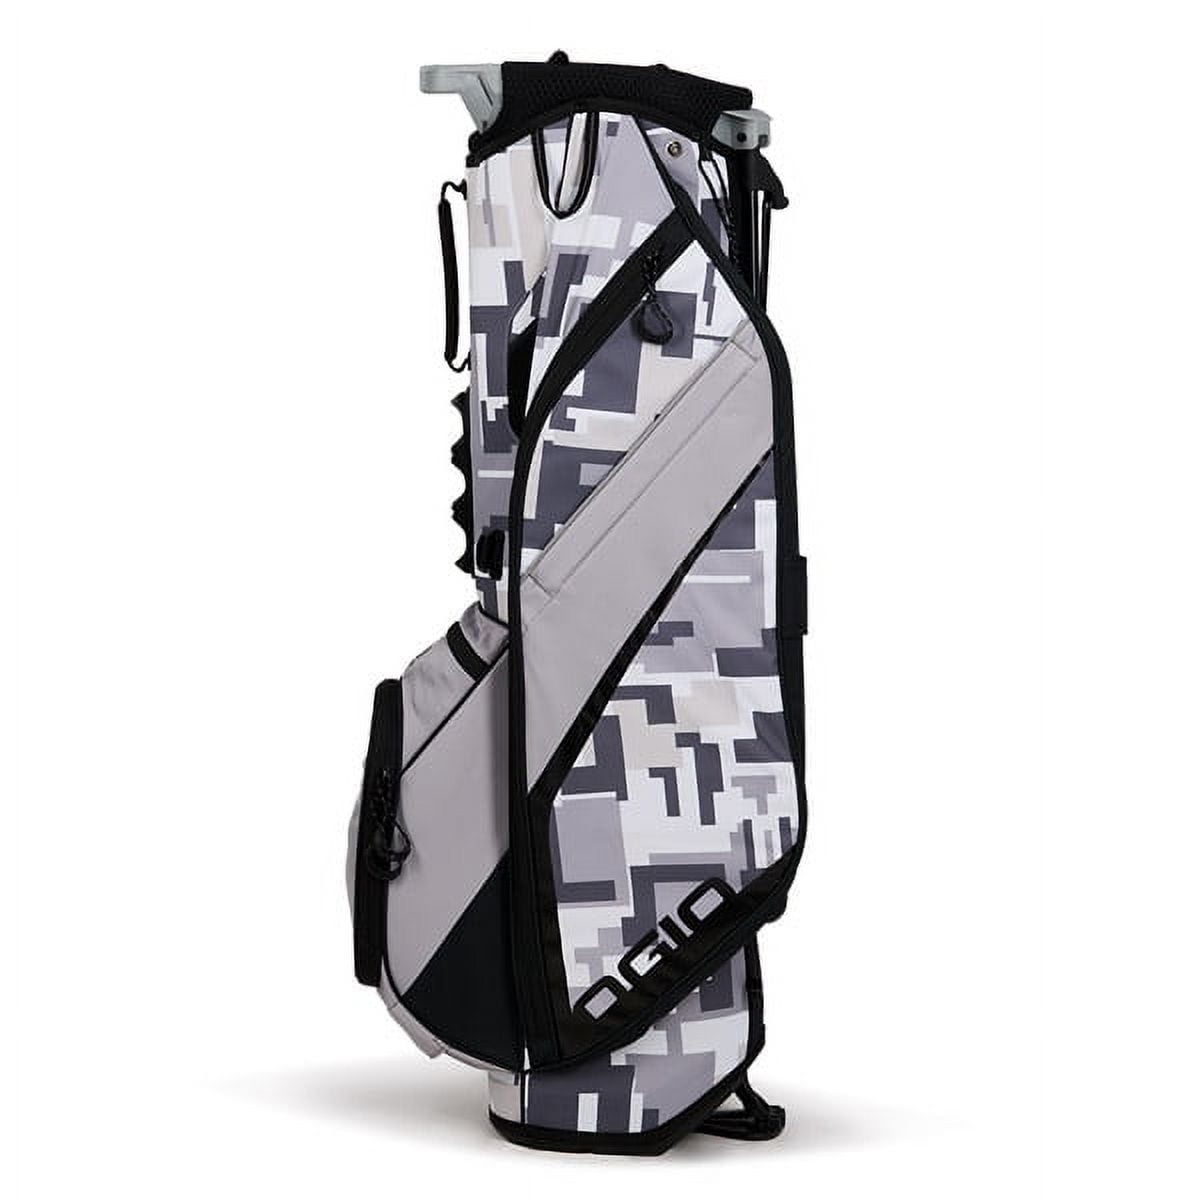 NEW Ogio Golf Fuse 4 Stand / Carry Bag 4-Way Top - Cyber Camo